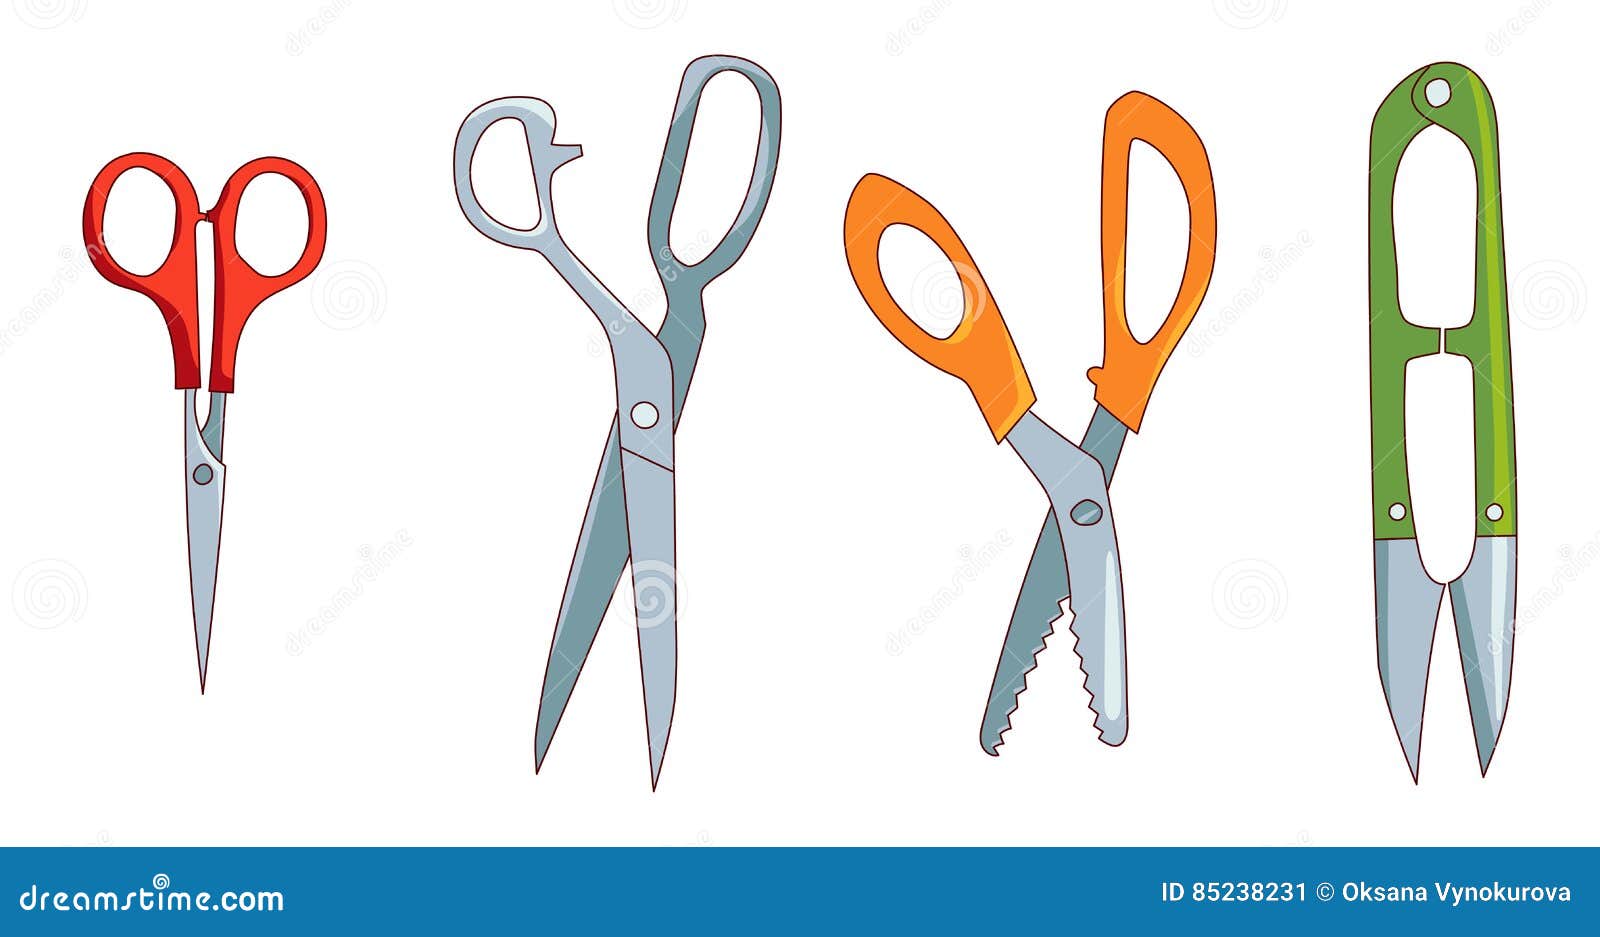 Sewing cutting tools stock vector. Illustration of fabric - 85238231